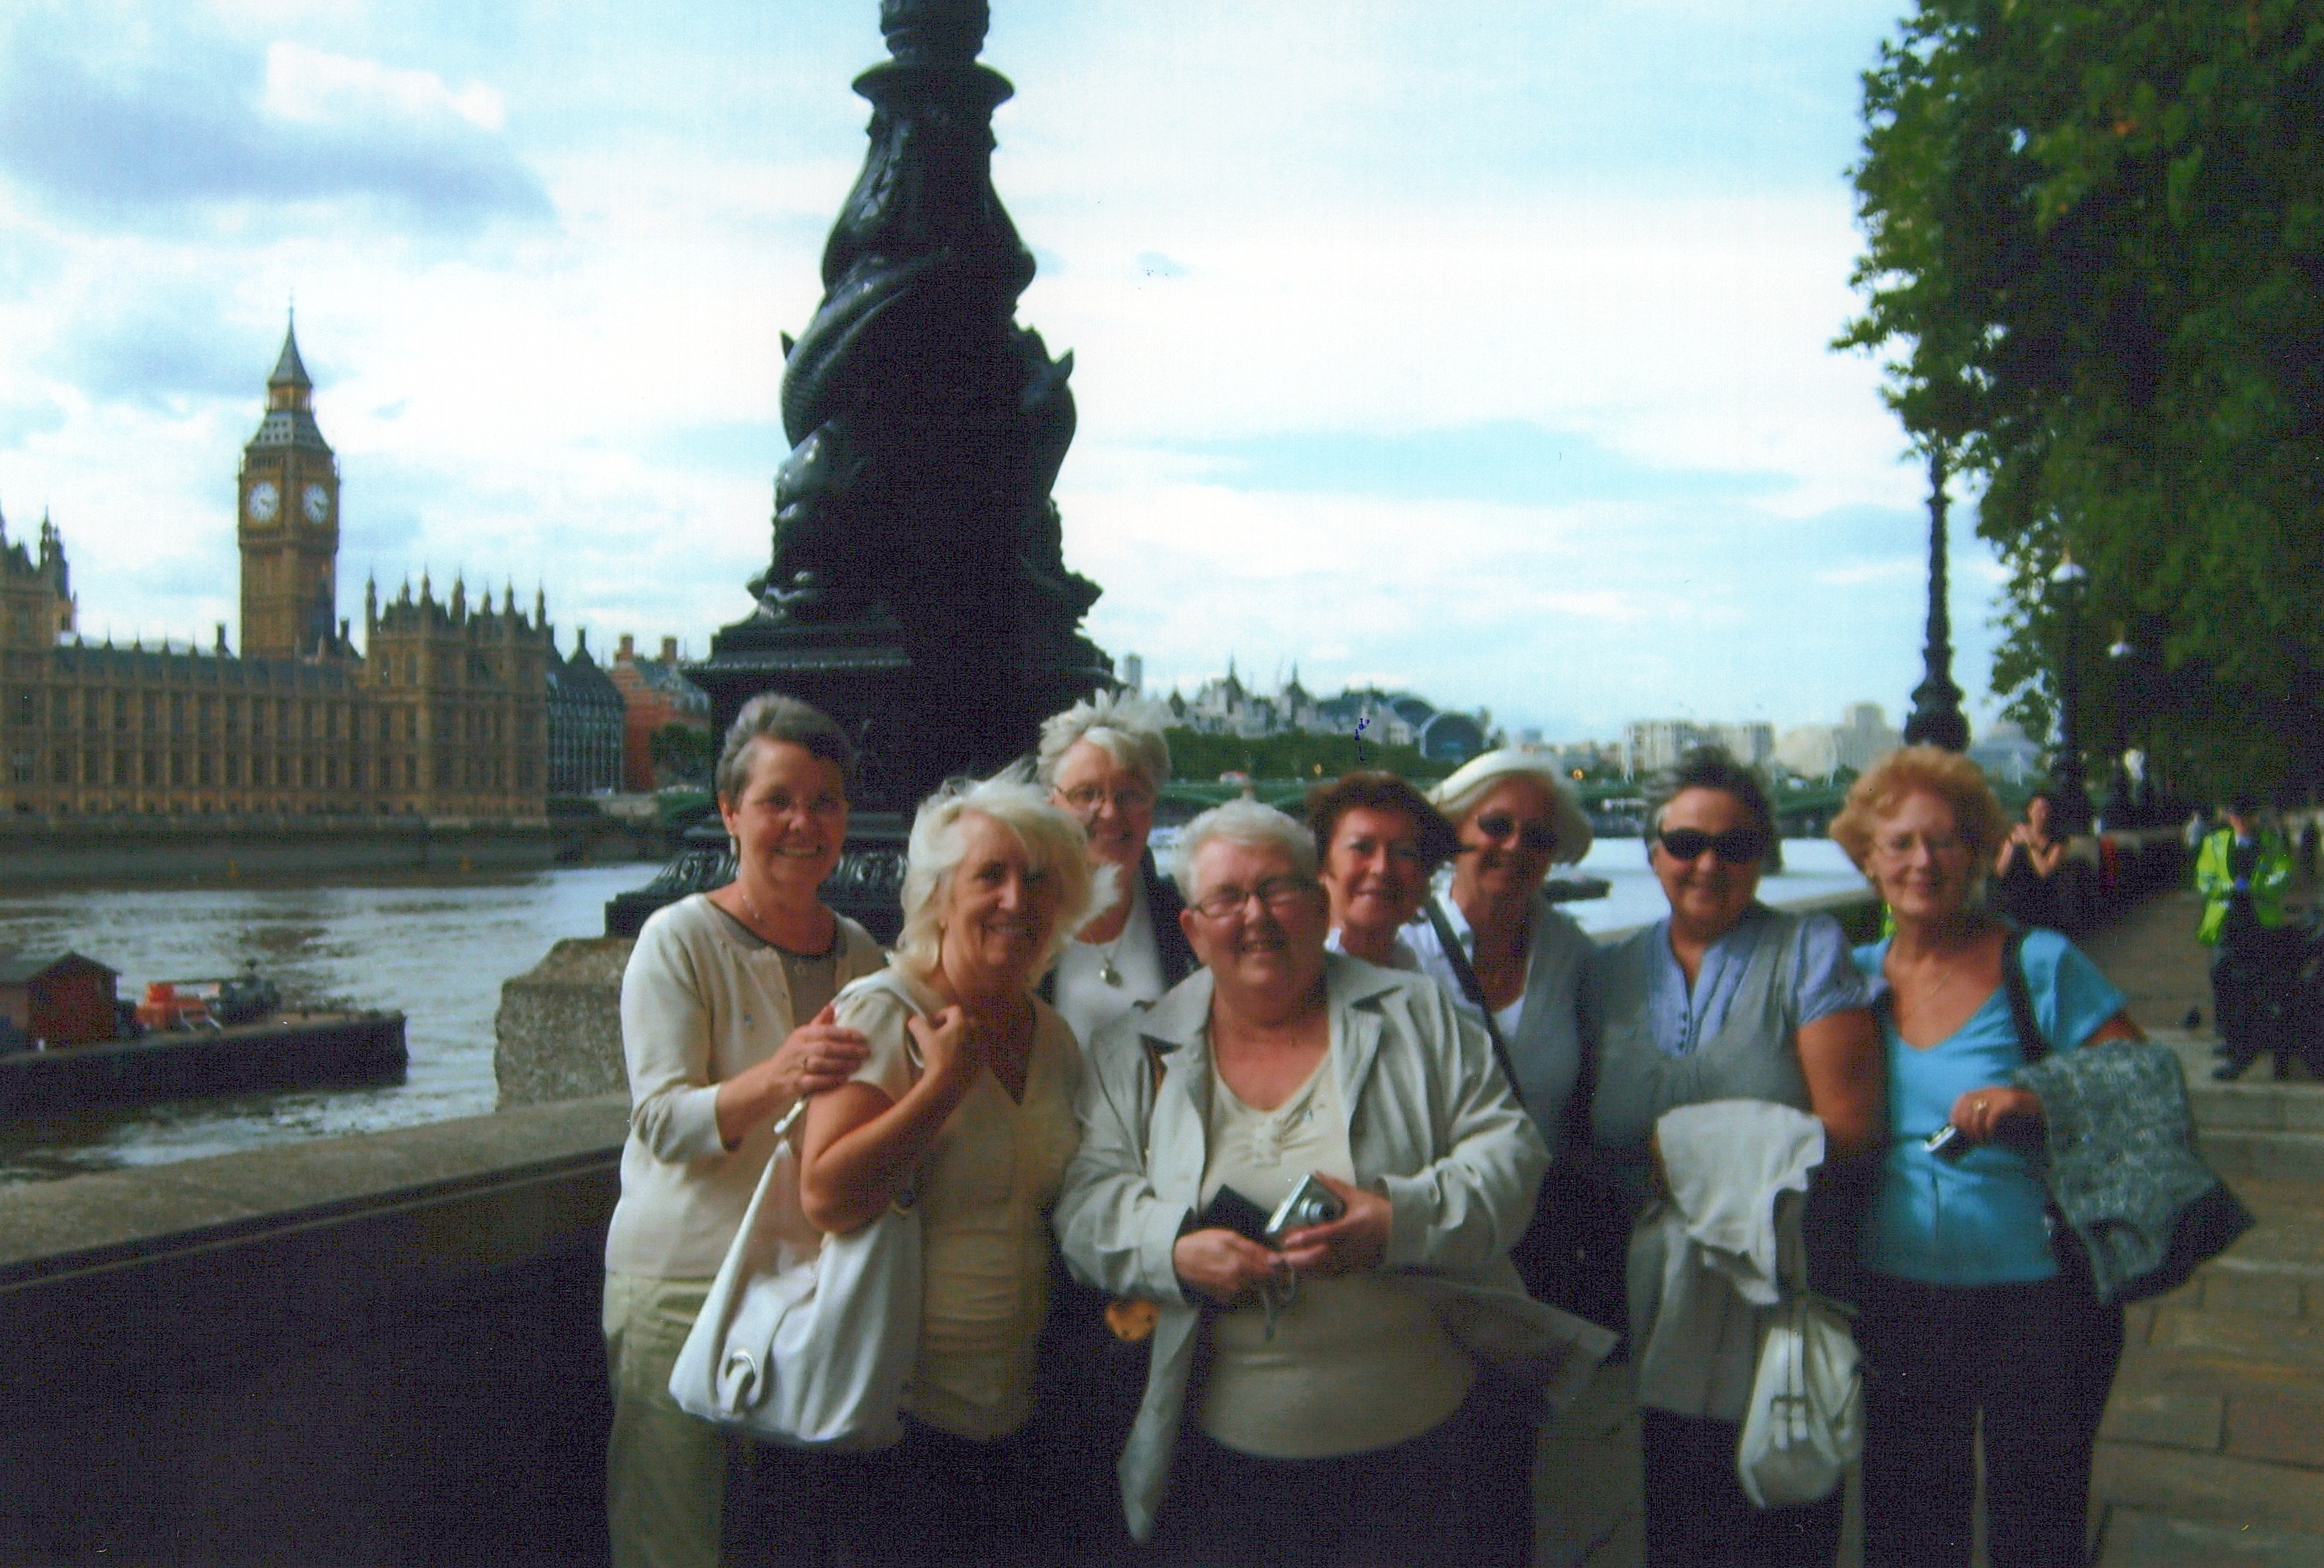 Trip to London for a Reunion with school friends from Stockport - L to R Joan, Mary, Ann, Pat, Kath, Kath and Kath and Mum